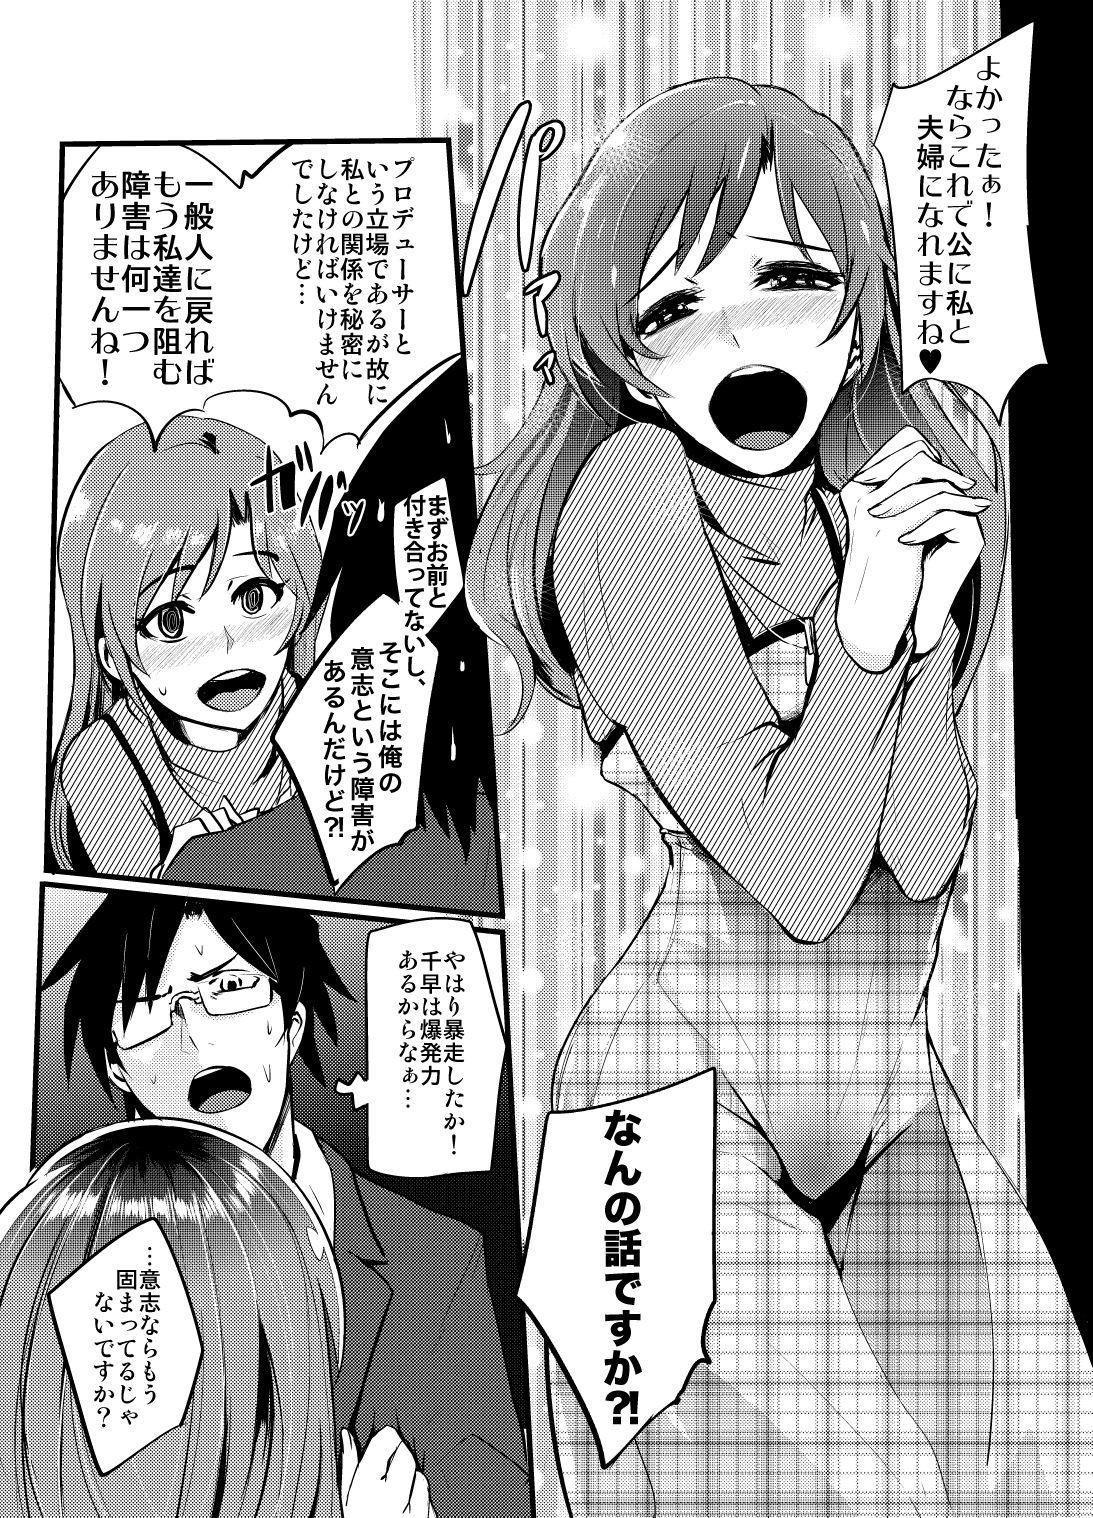 Indoor THEYANDEREM@STER - The idolmaster Celebrity Sex Scene - Page 4